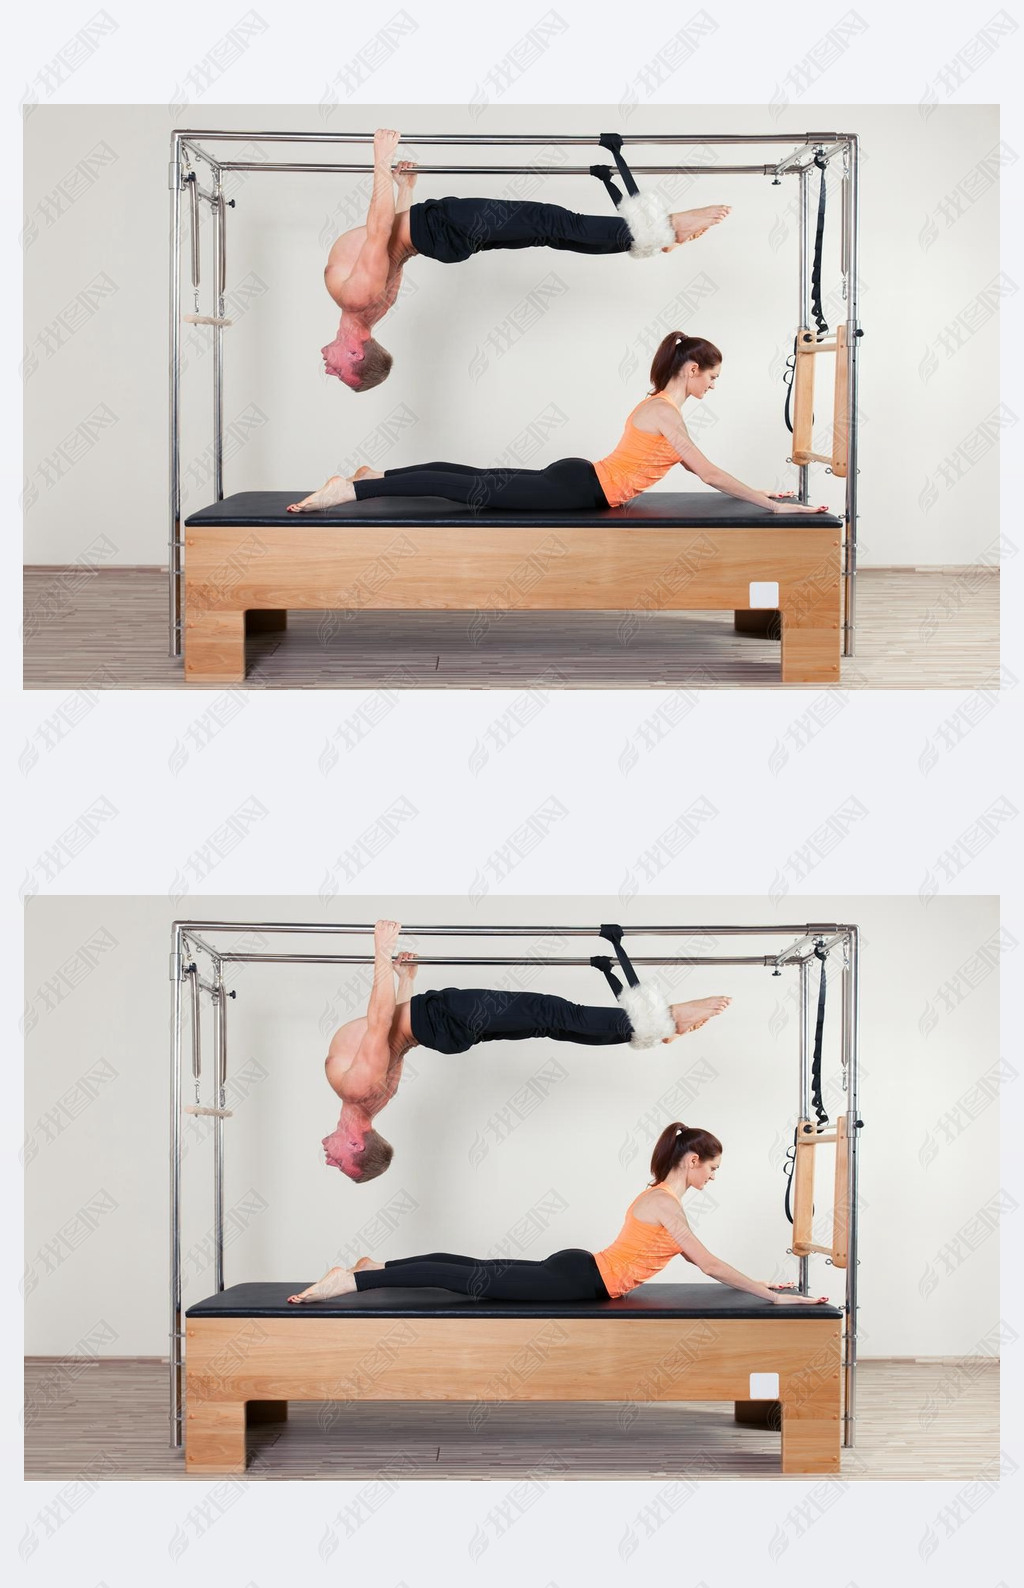 Pilates aerobic instructor woman and man in cadillac fitness exercise